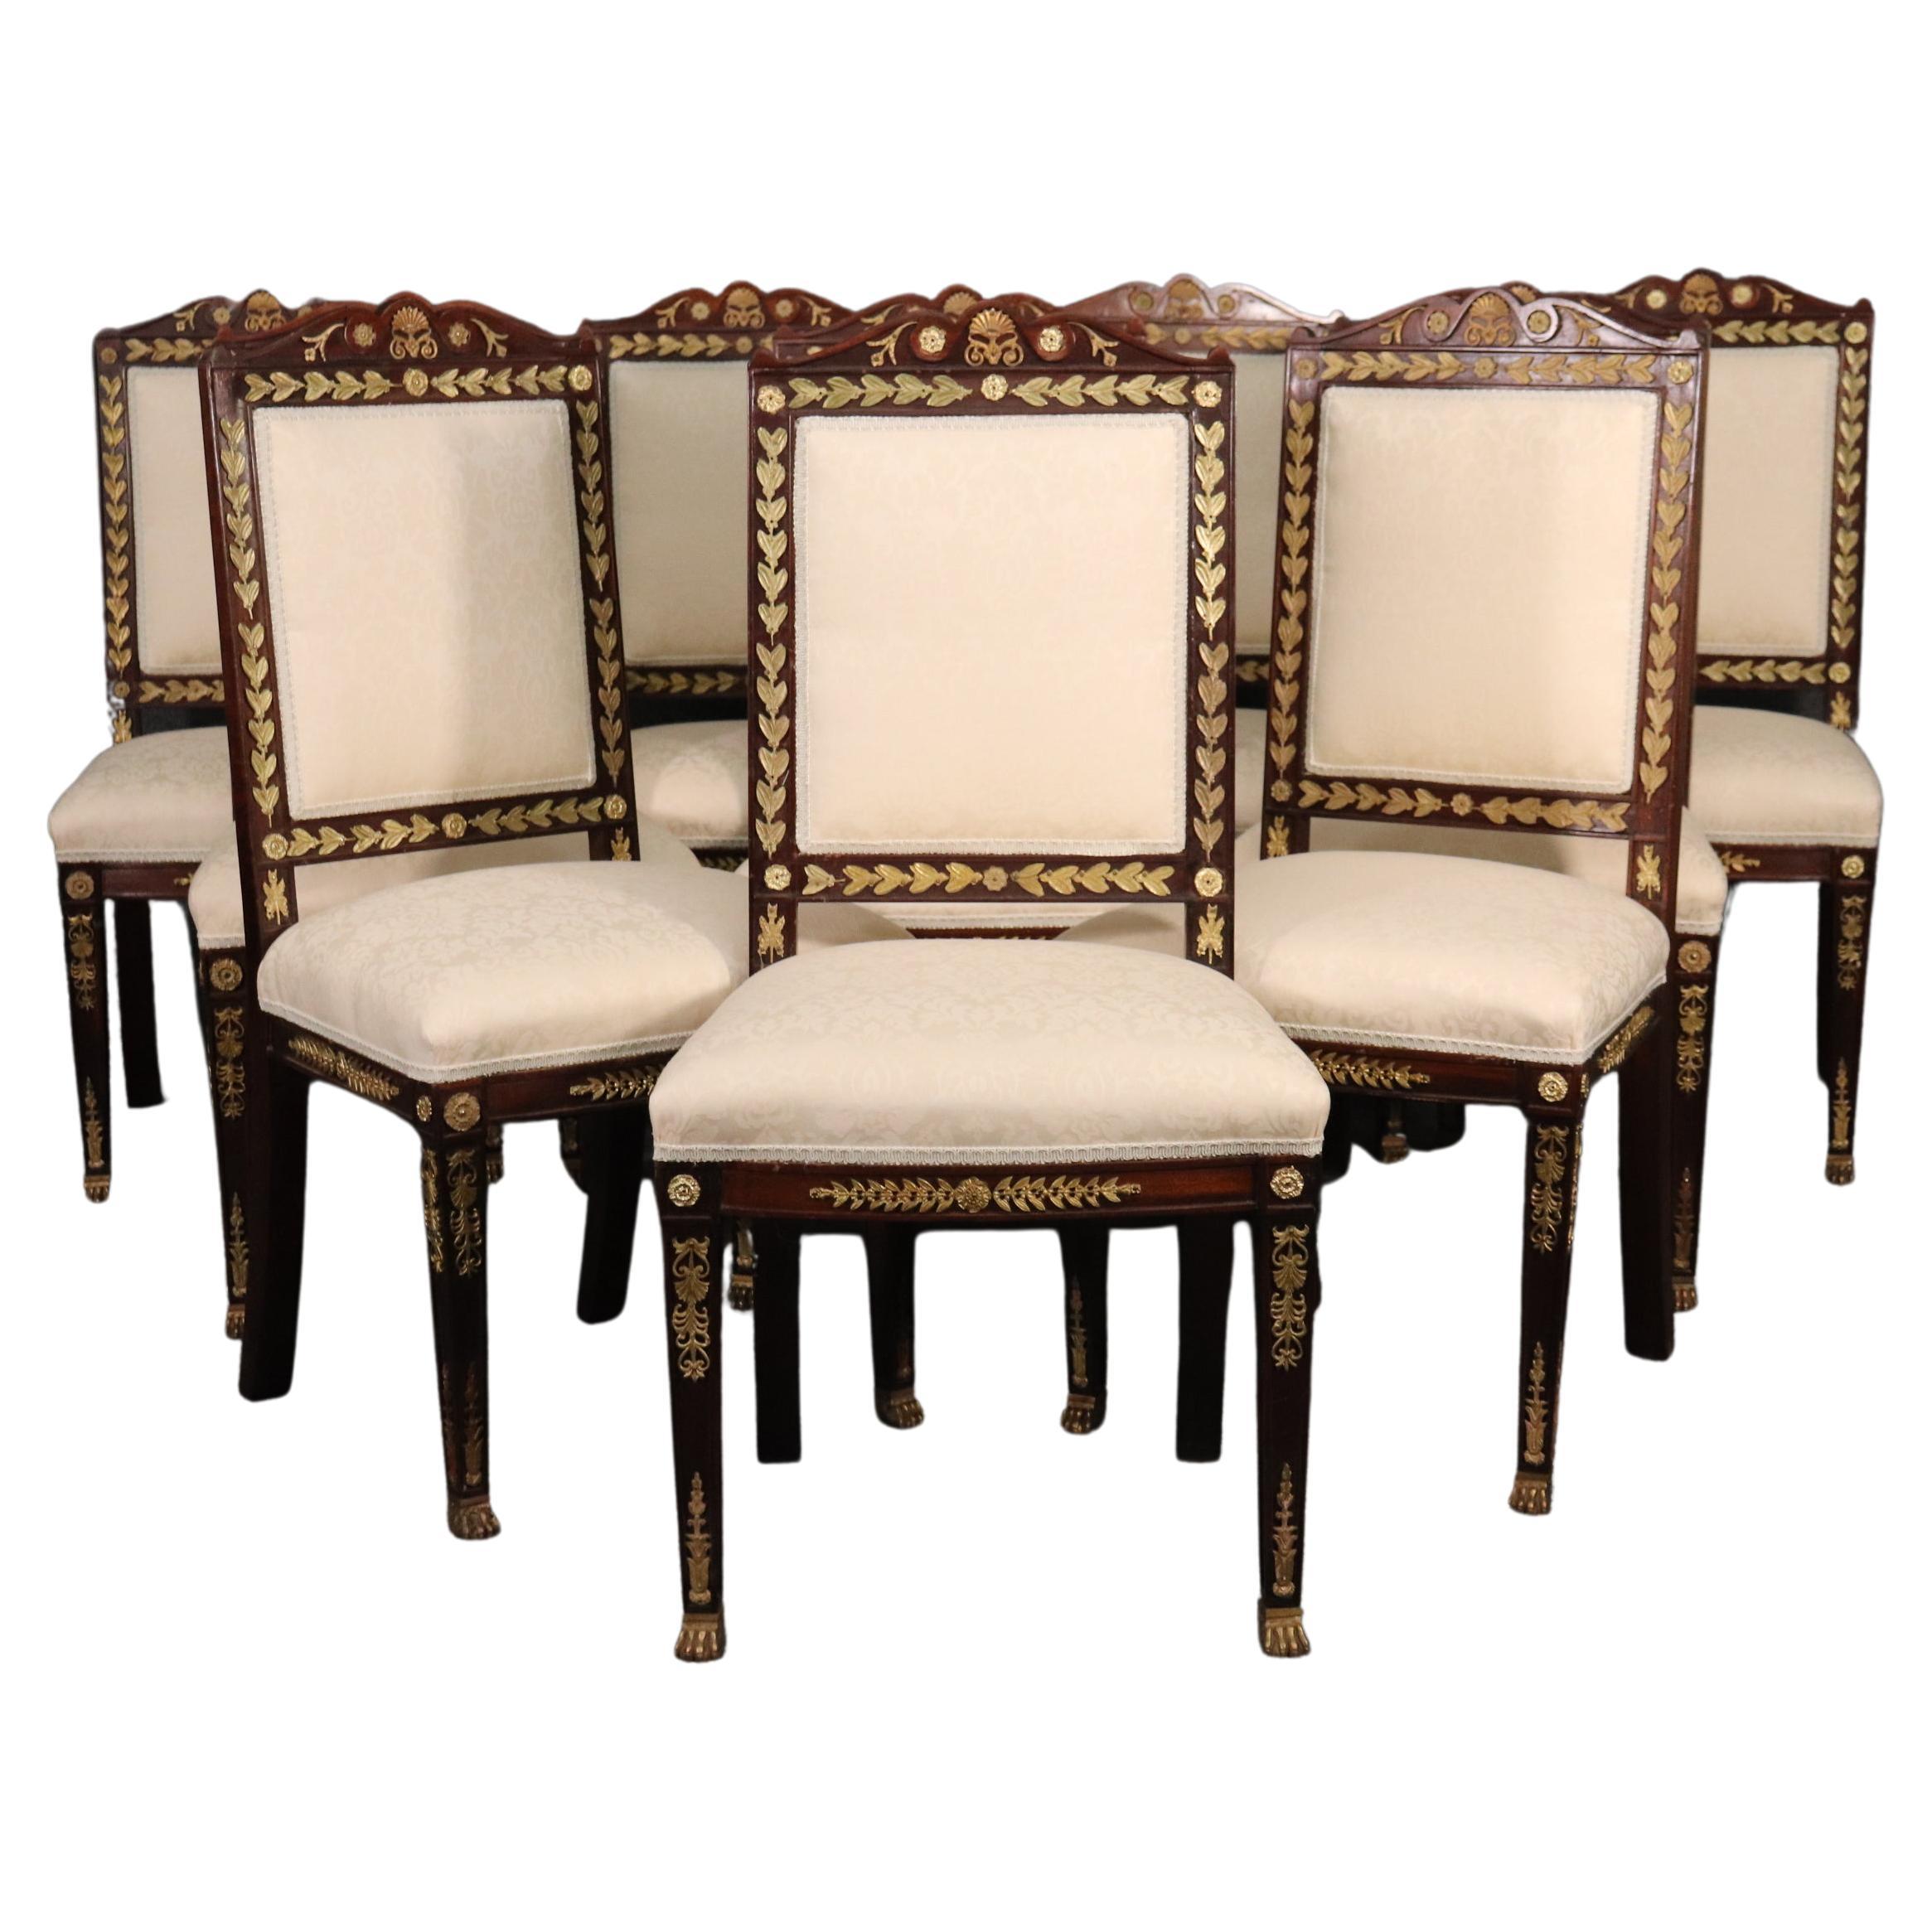 Set of 10 Bronze Mounted Walnut French Empire Dining Chairs Circa 1950s